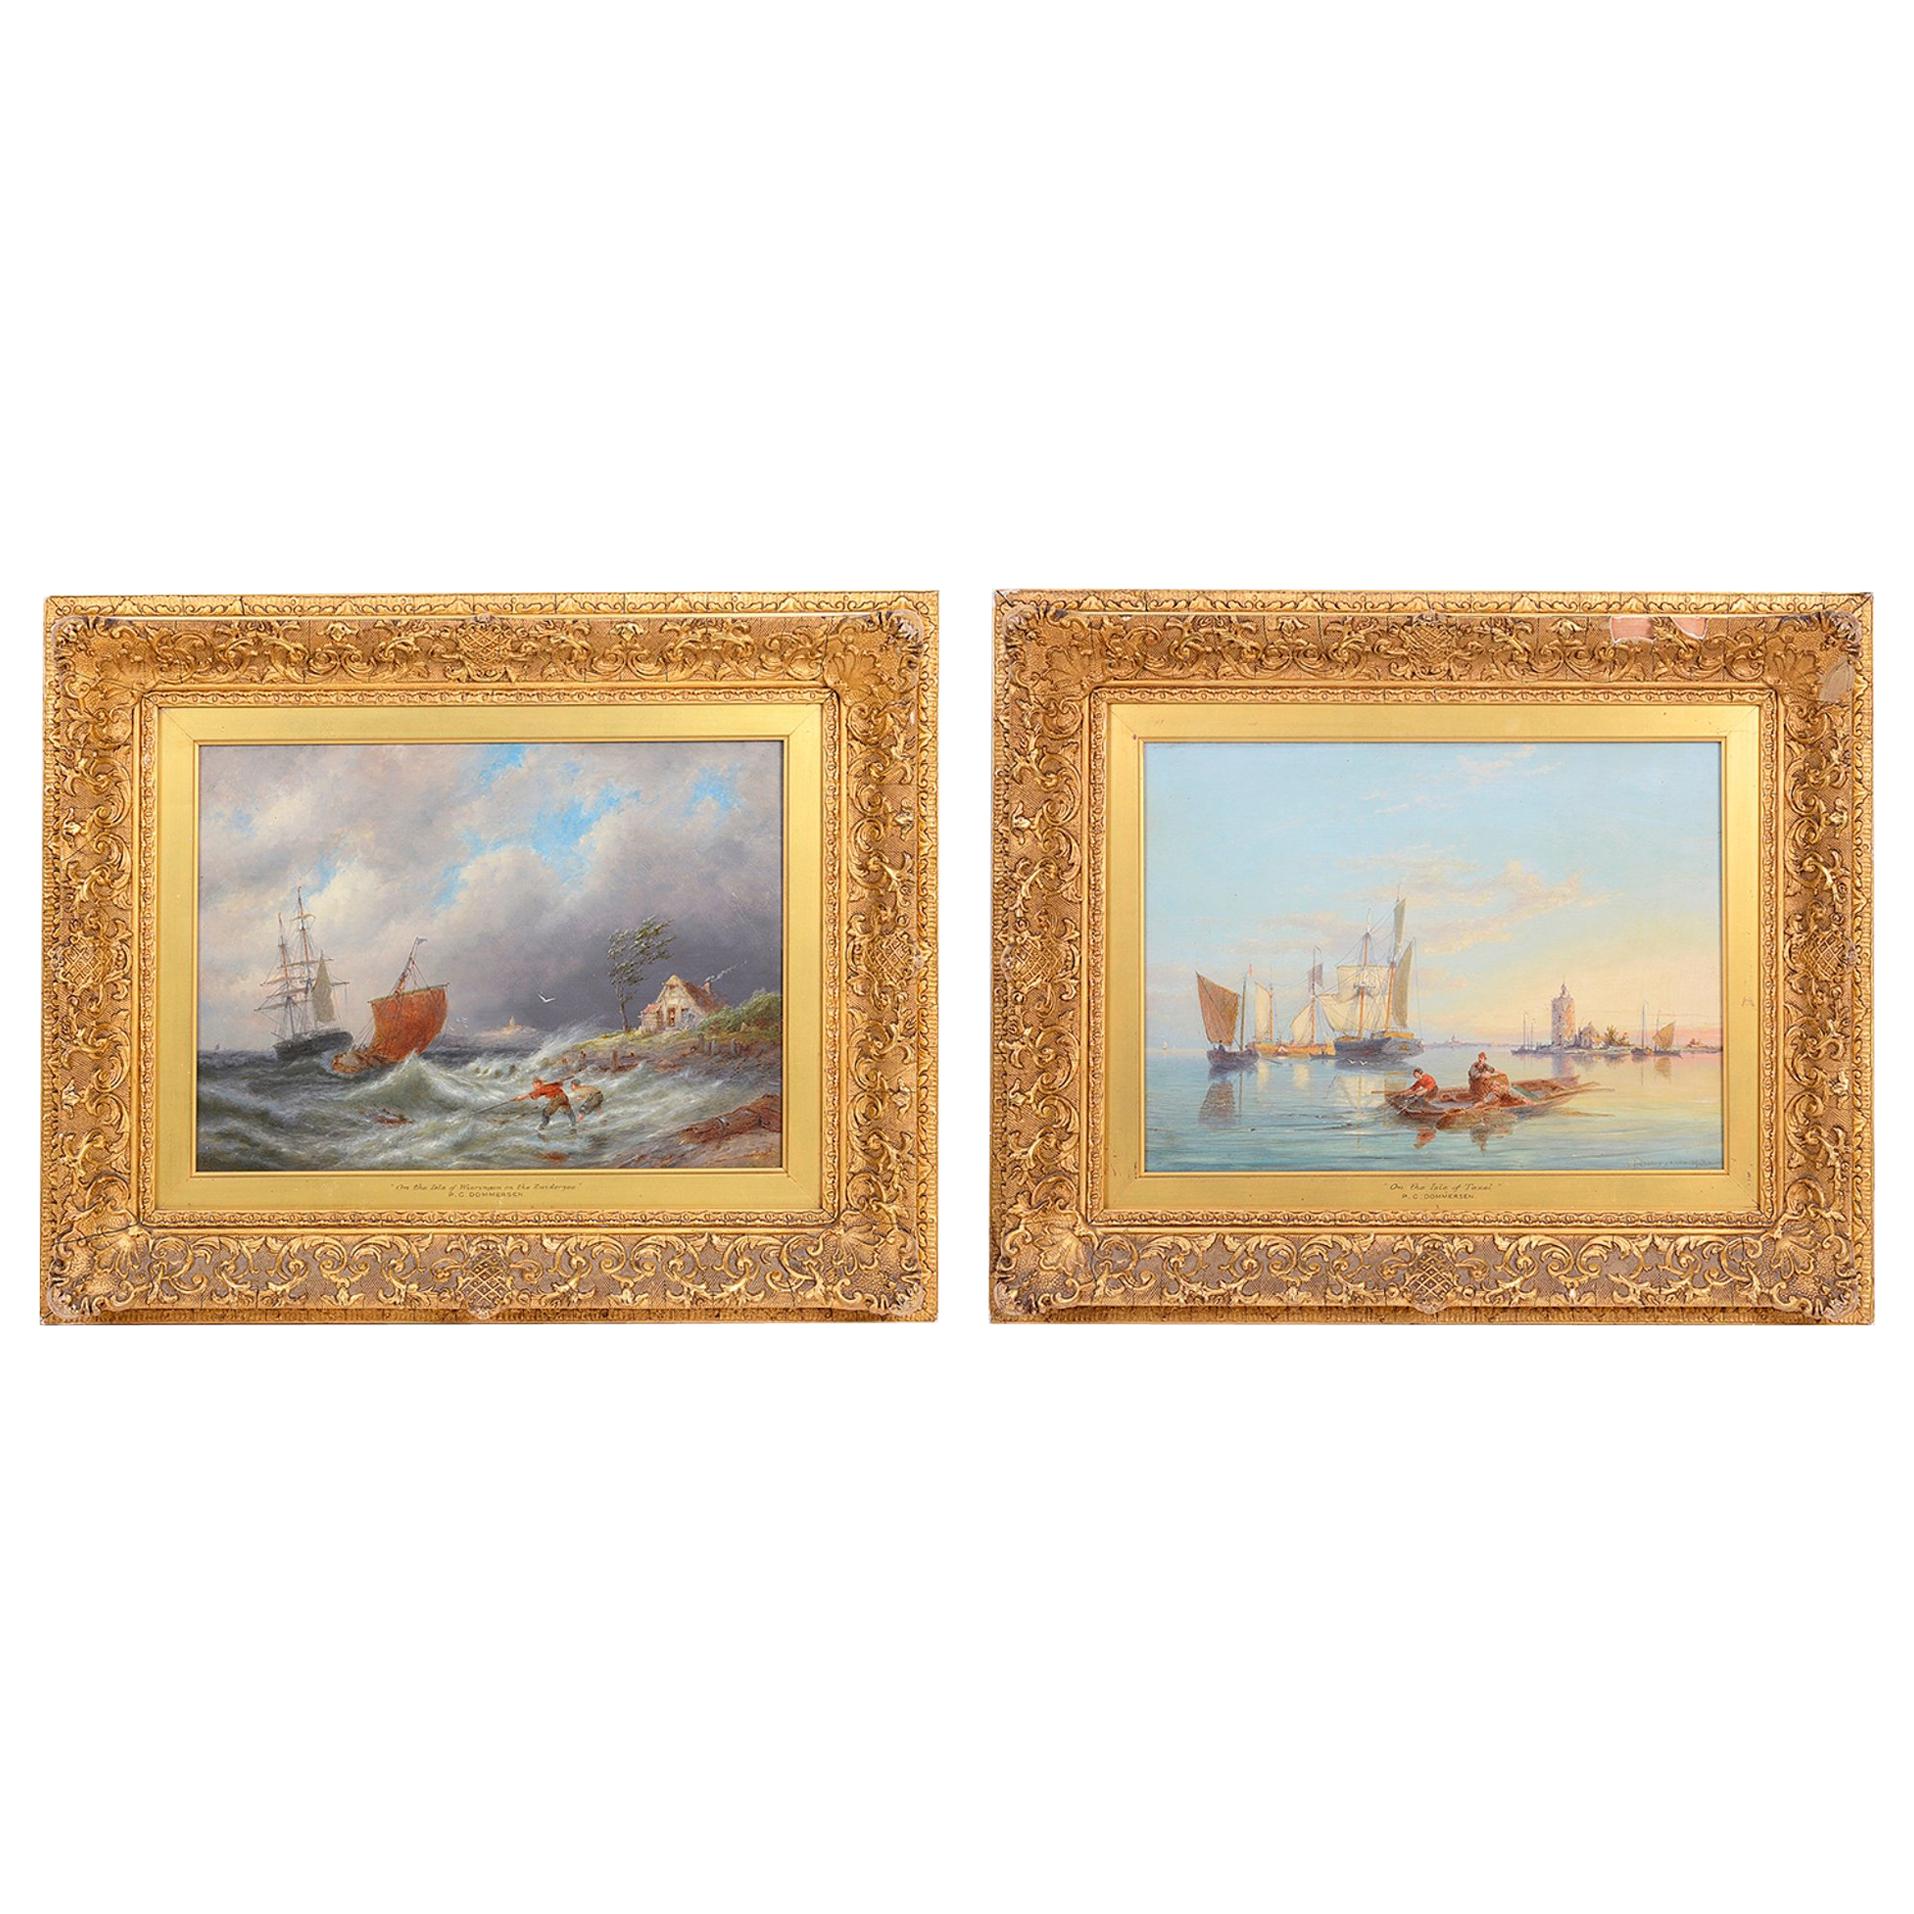 Pair of Oil on Canvas Seascapes by D.C. Dommerson, 19th Century